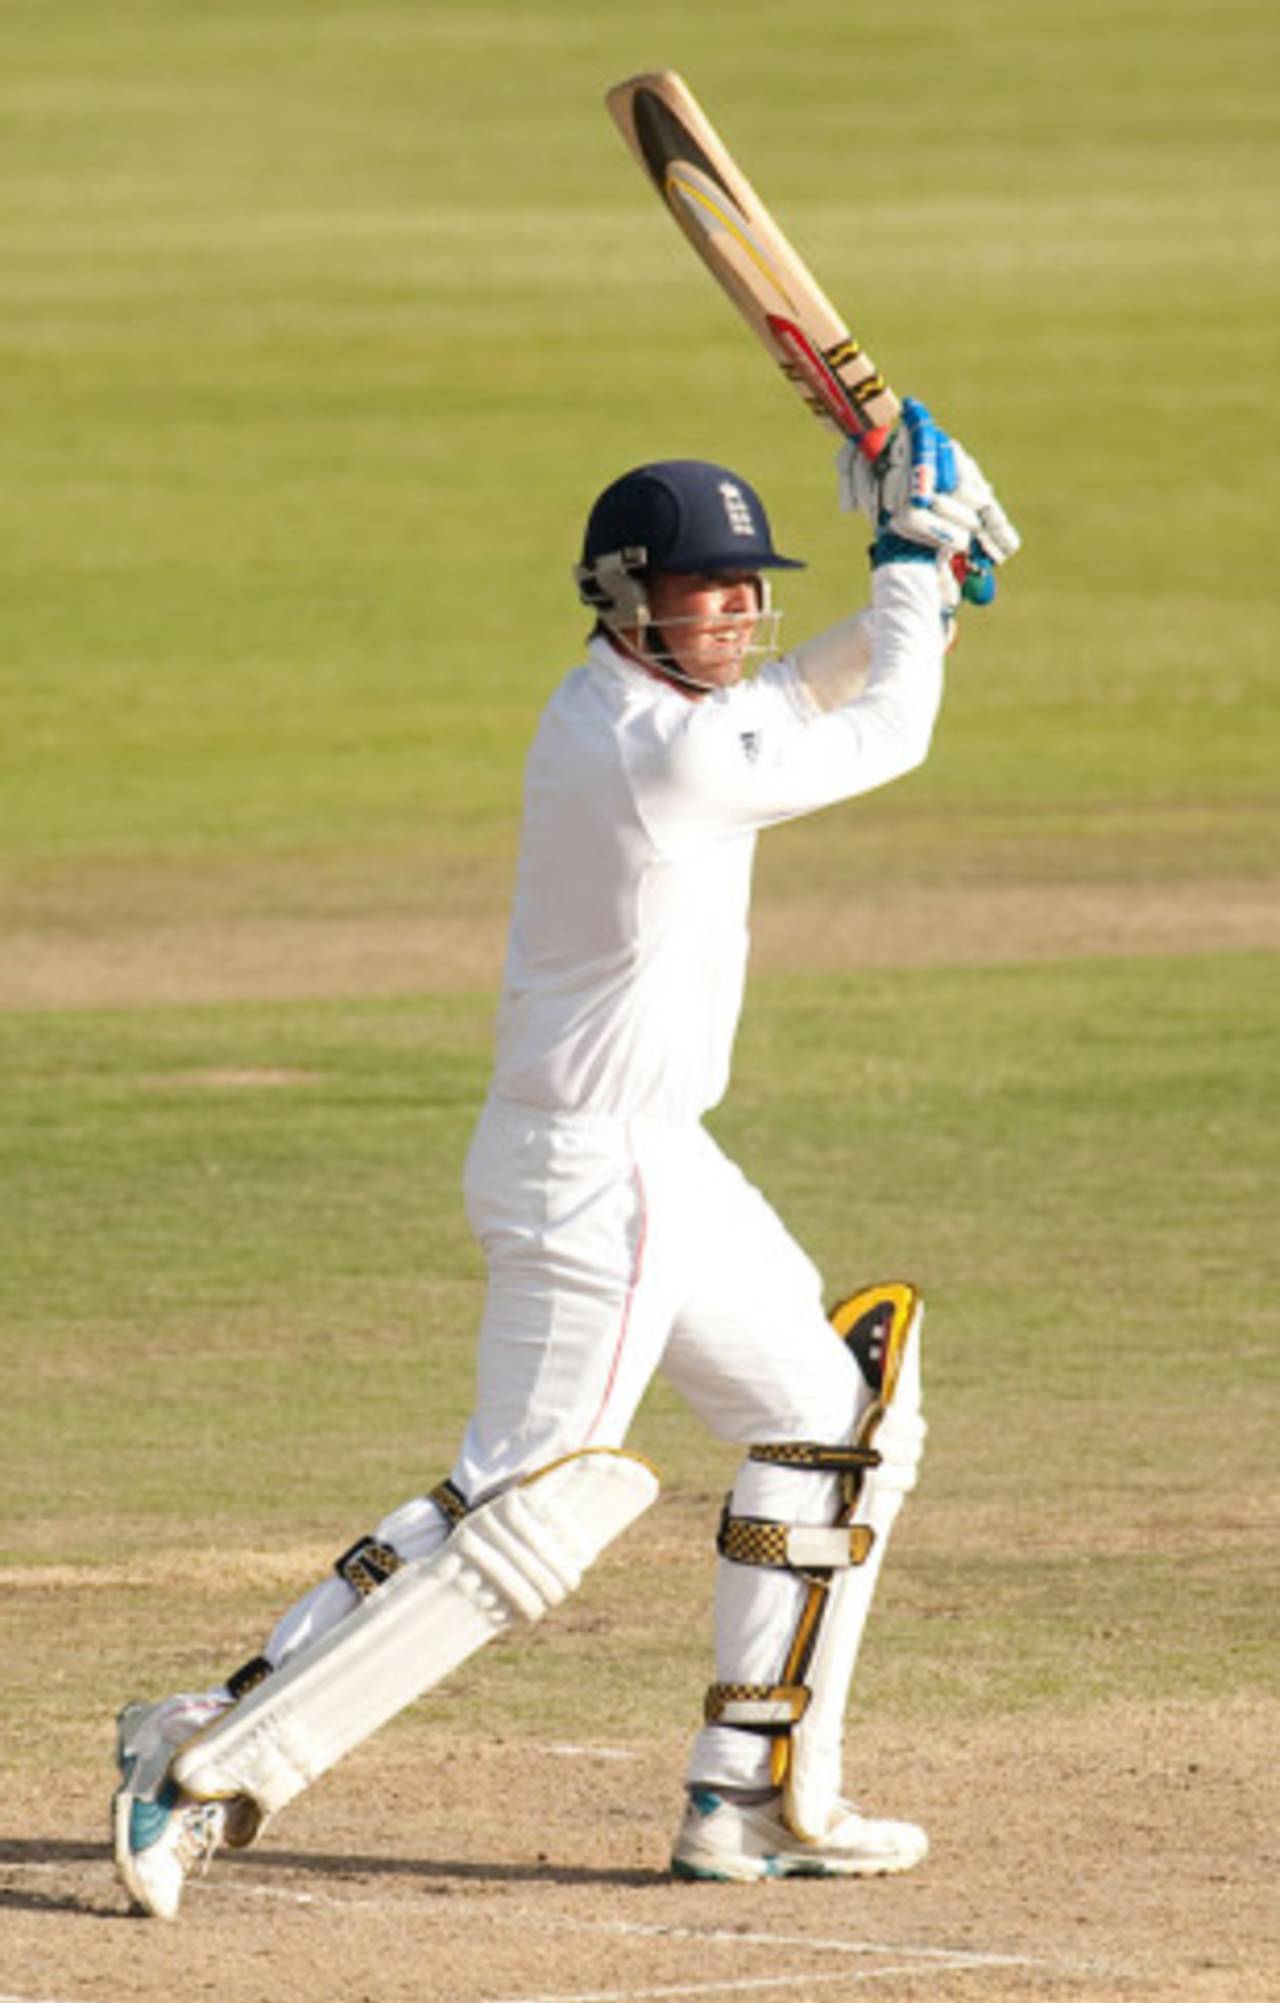 Graeme Swann scored all round the wicket in his momentum-changing innings, South Africa v England, 1st Test, Centurion, December 18, 2009